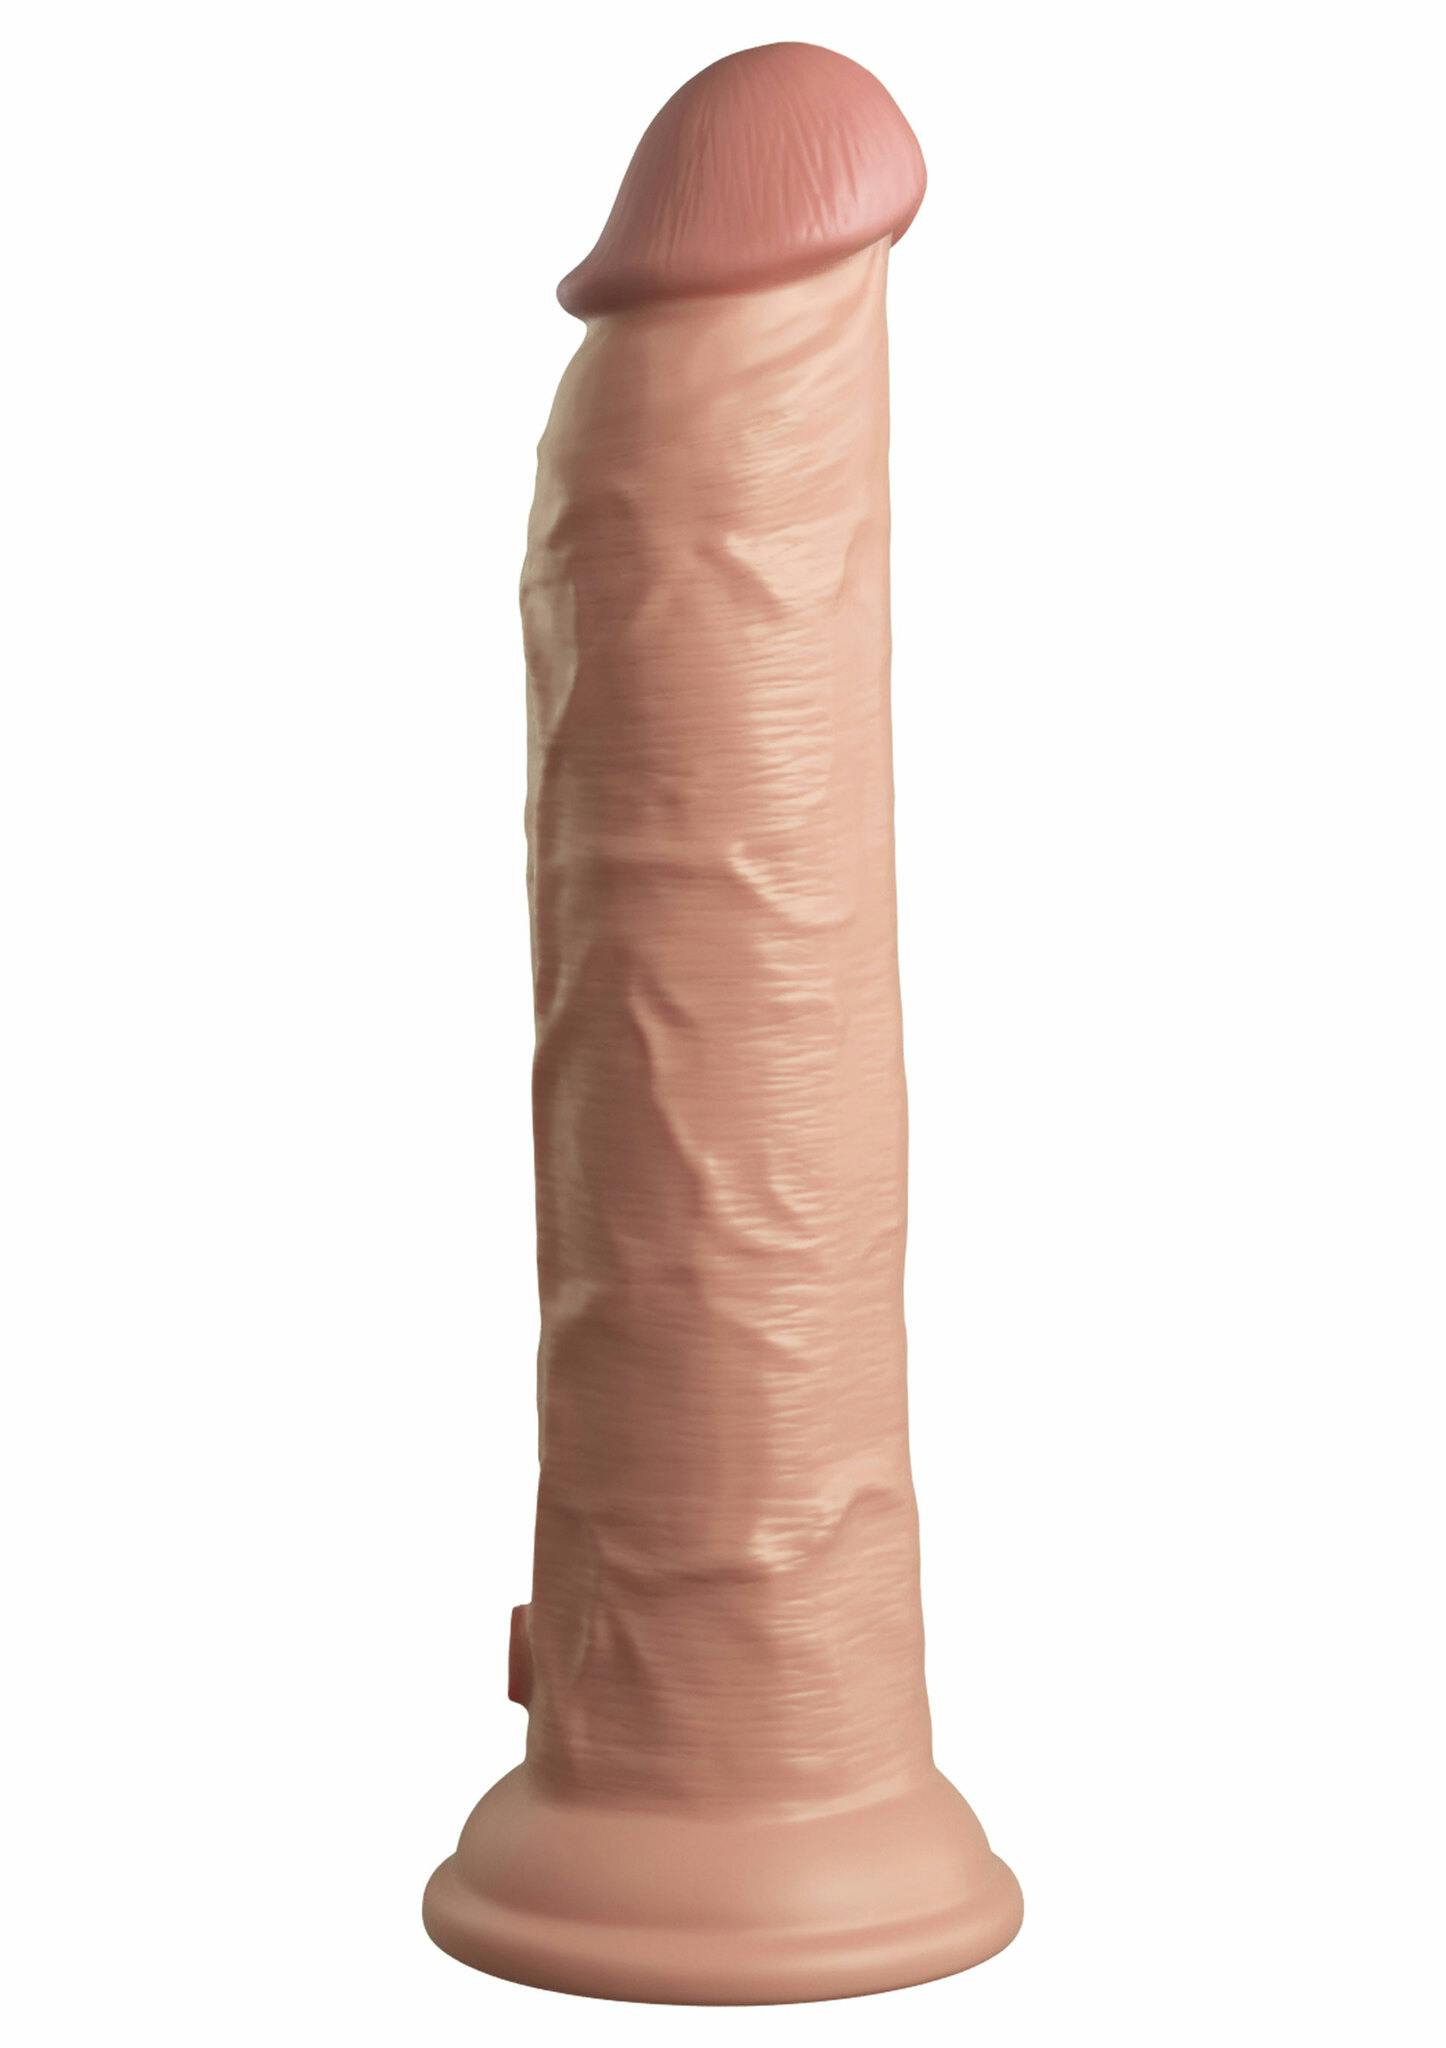 King Cock - Dual Density Silicone Cock 9 inch